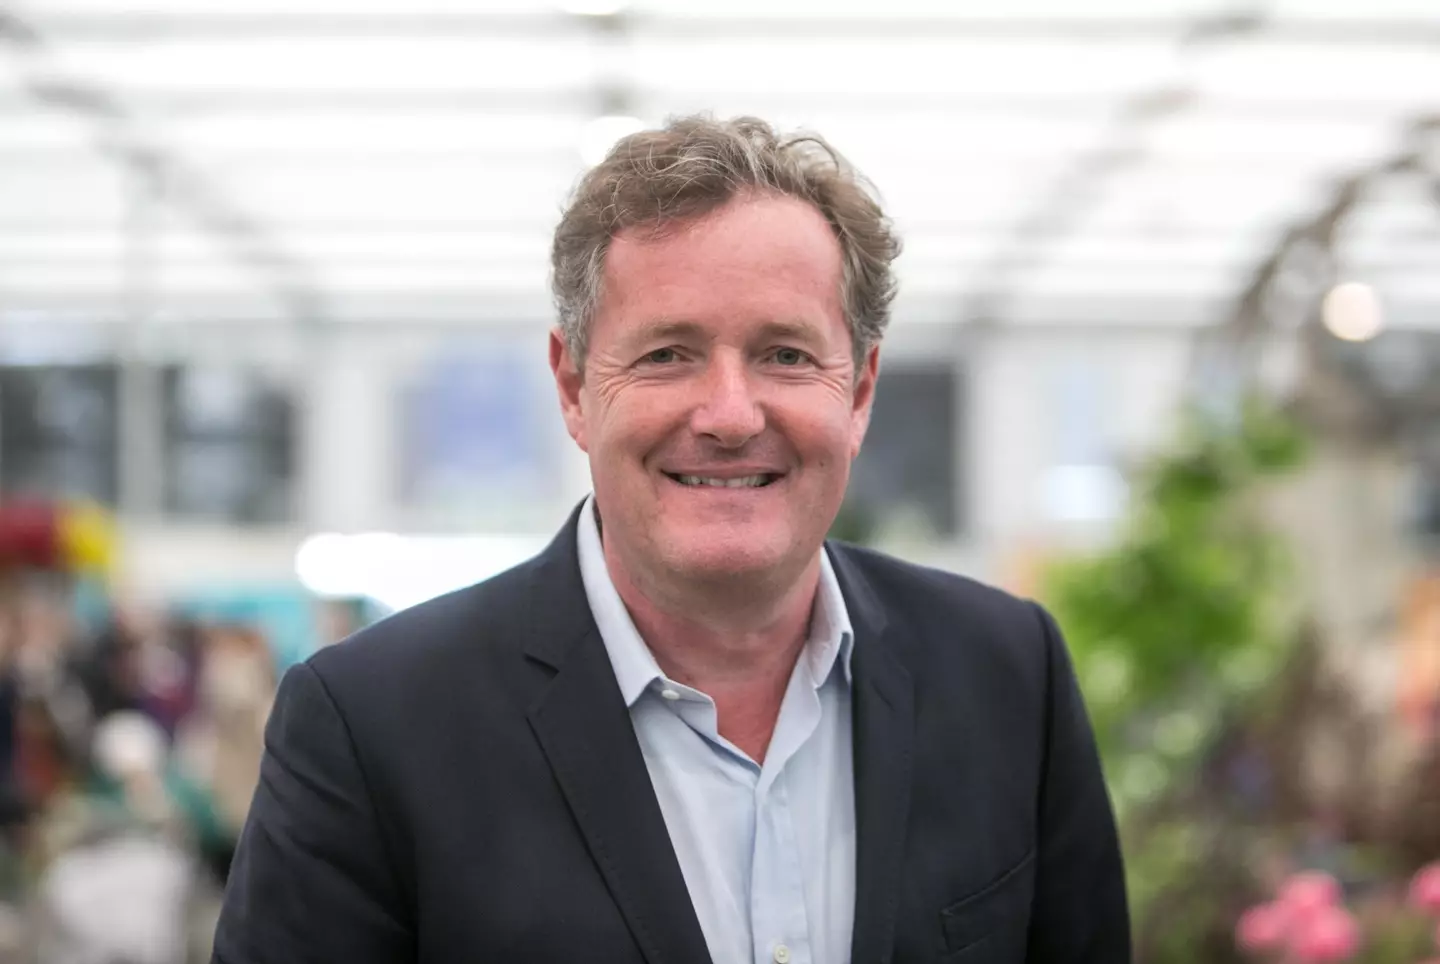 Piers Morgan has opened up on his infamous clash with Jeremy Clarkson which left a scar on his head.